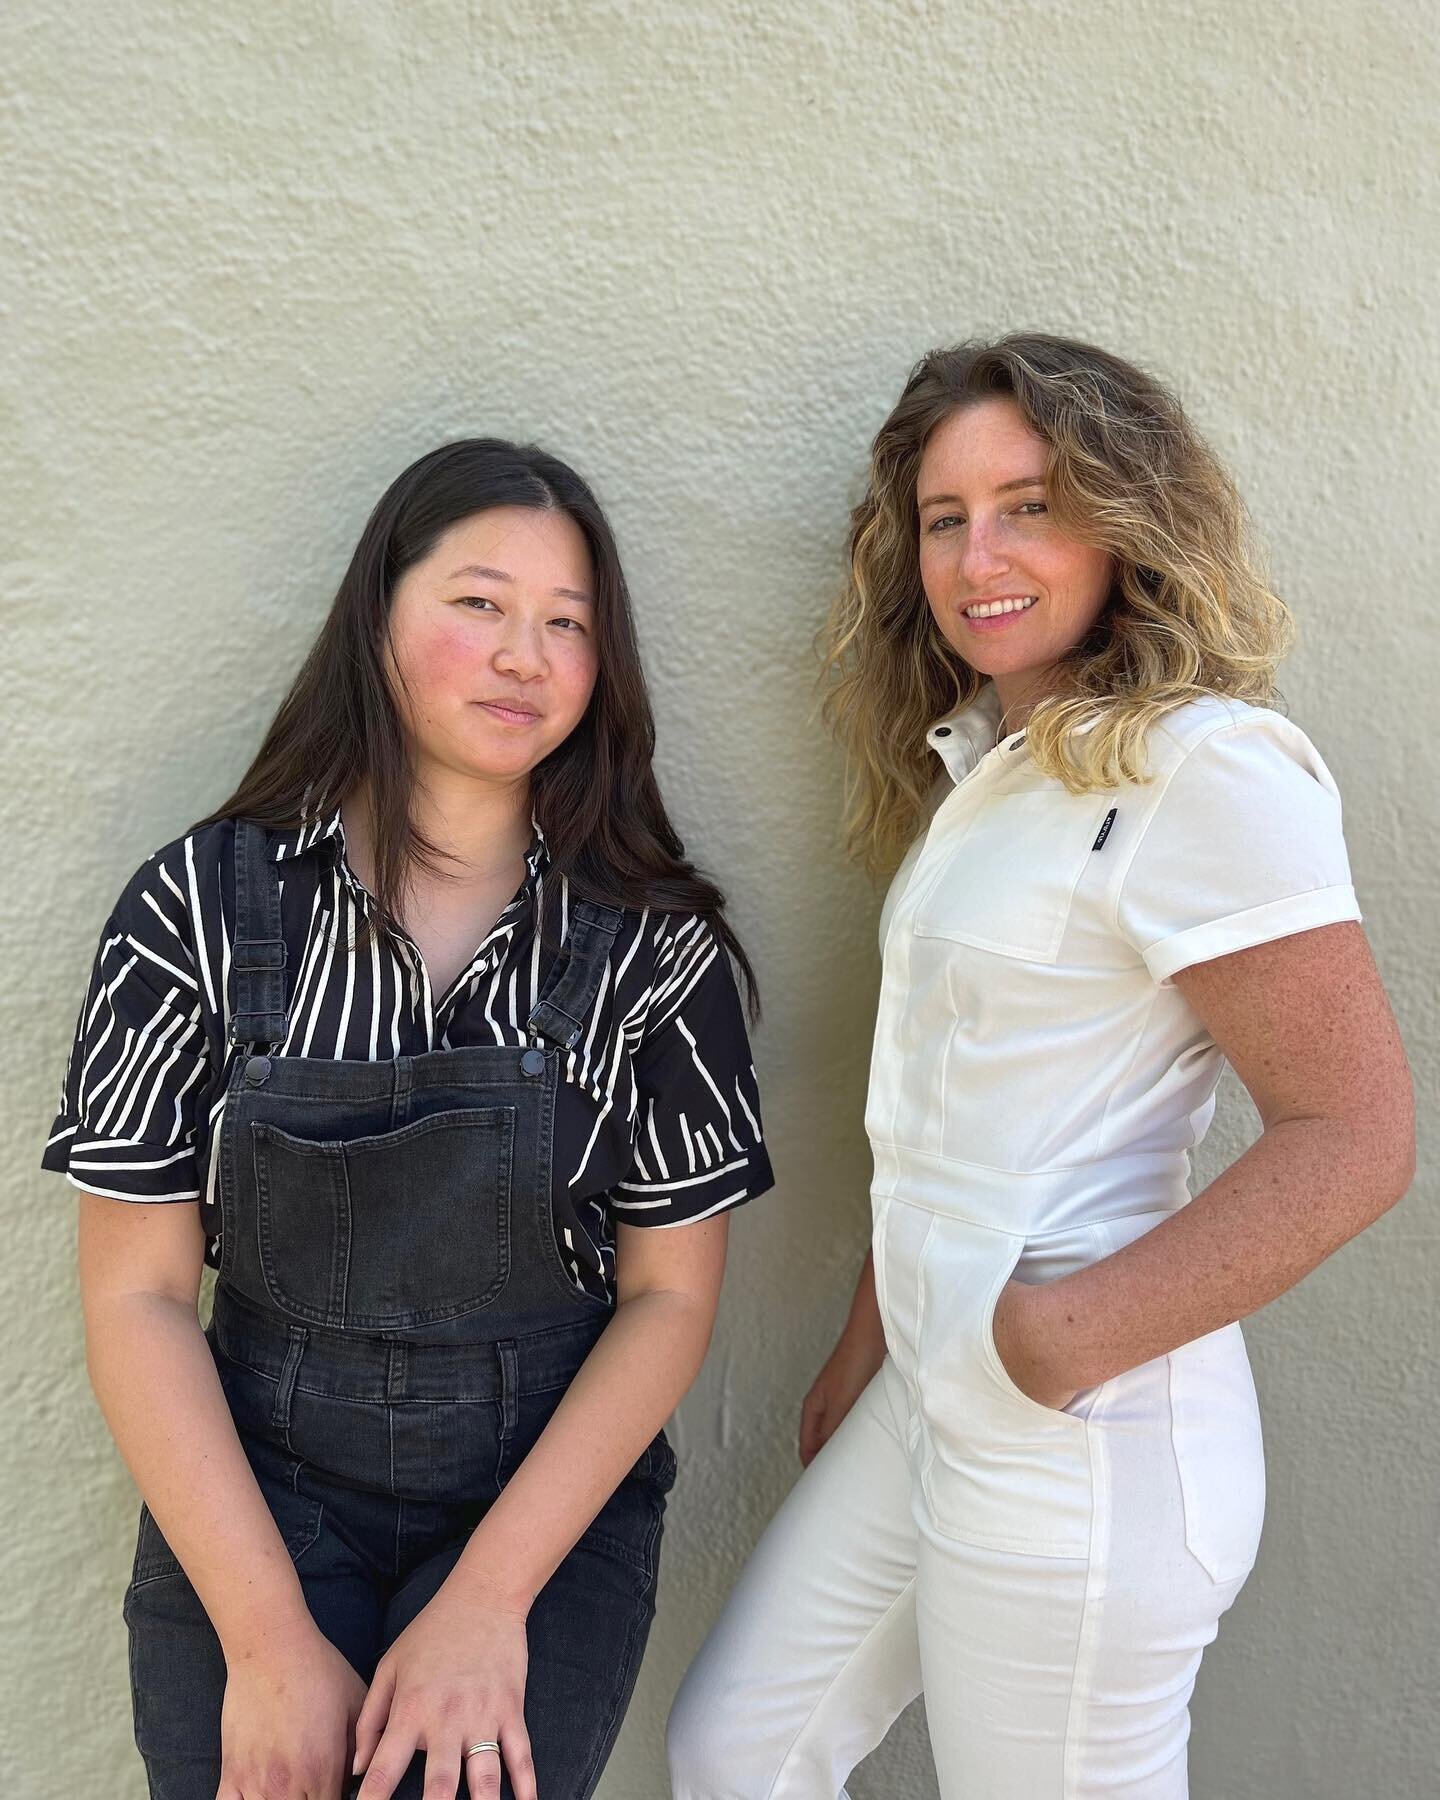 Hello! To those new to our page, welcome! We are Stephanie Lin and Neive Tierney, the garden gnomes behind Nectar Landscape Design. It has been a while since we posted as we have been busy cooking up some exciting garden delights. We cannot wait to s